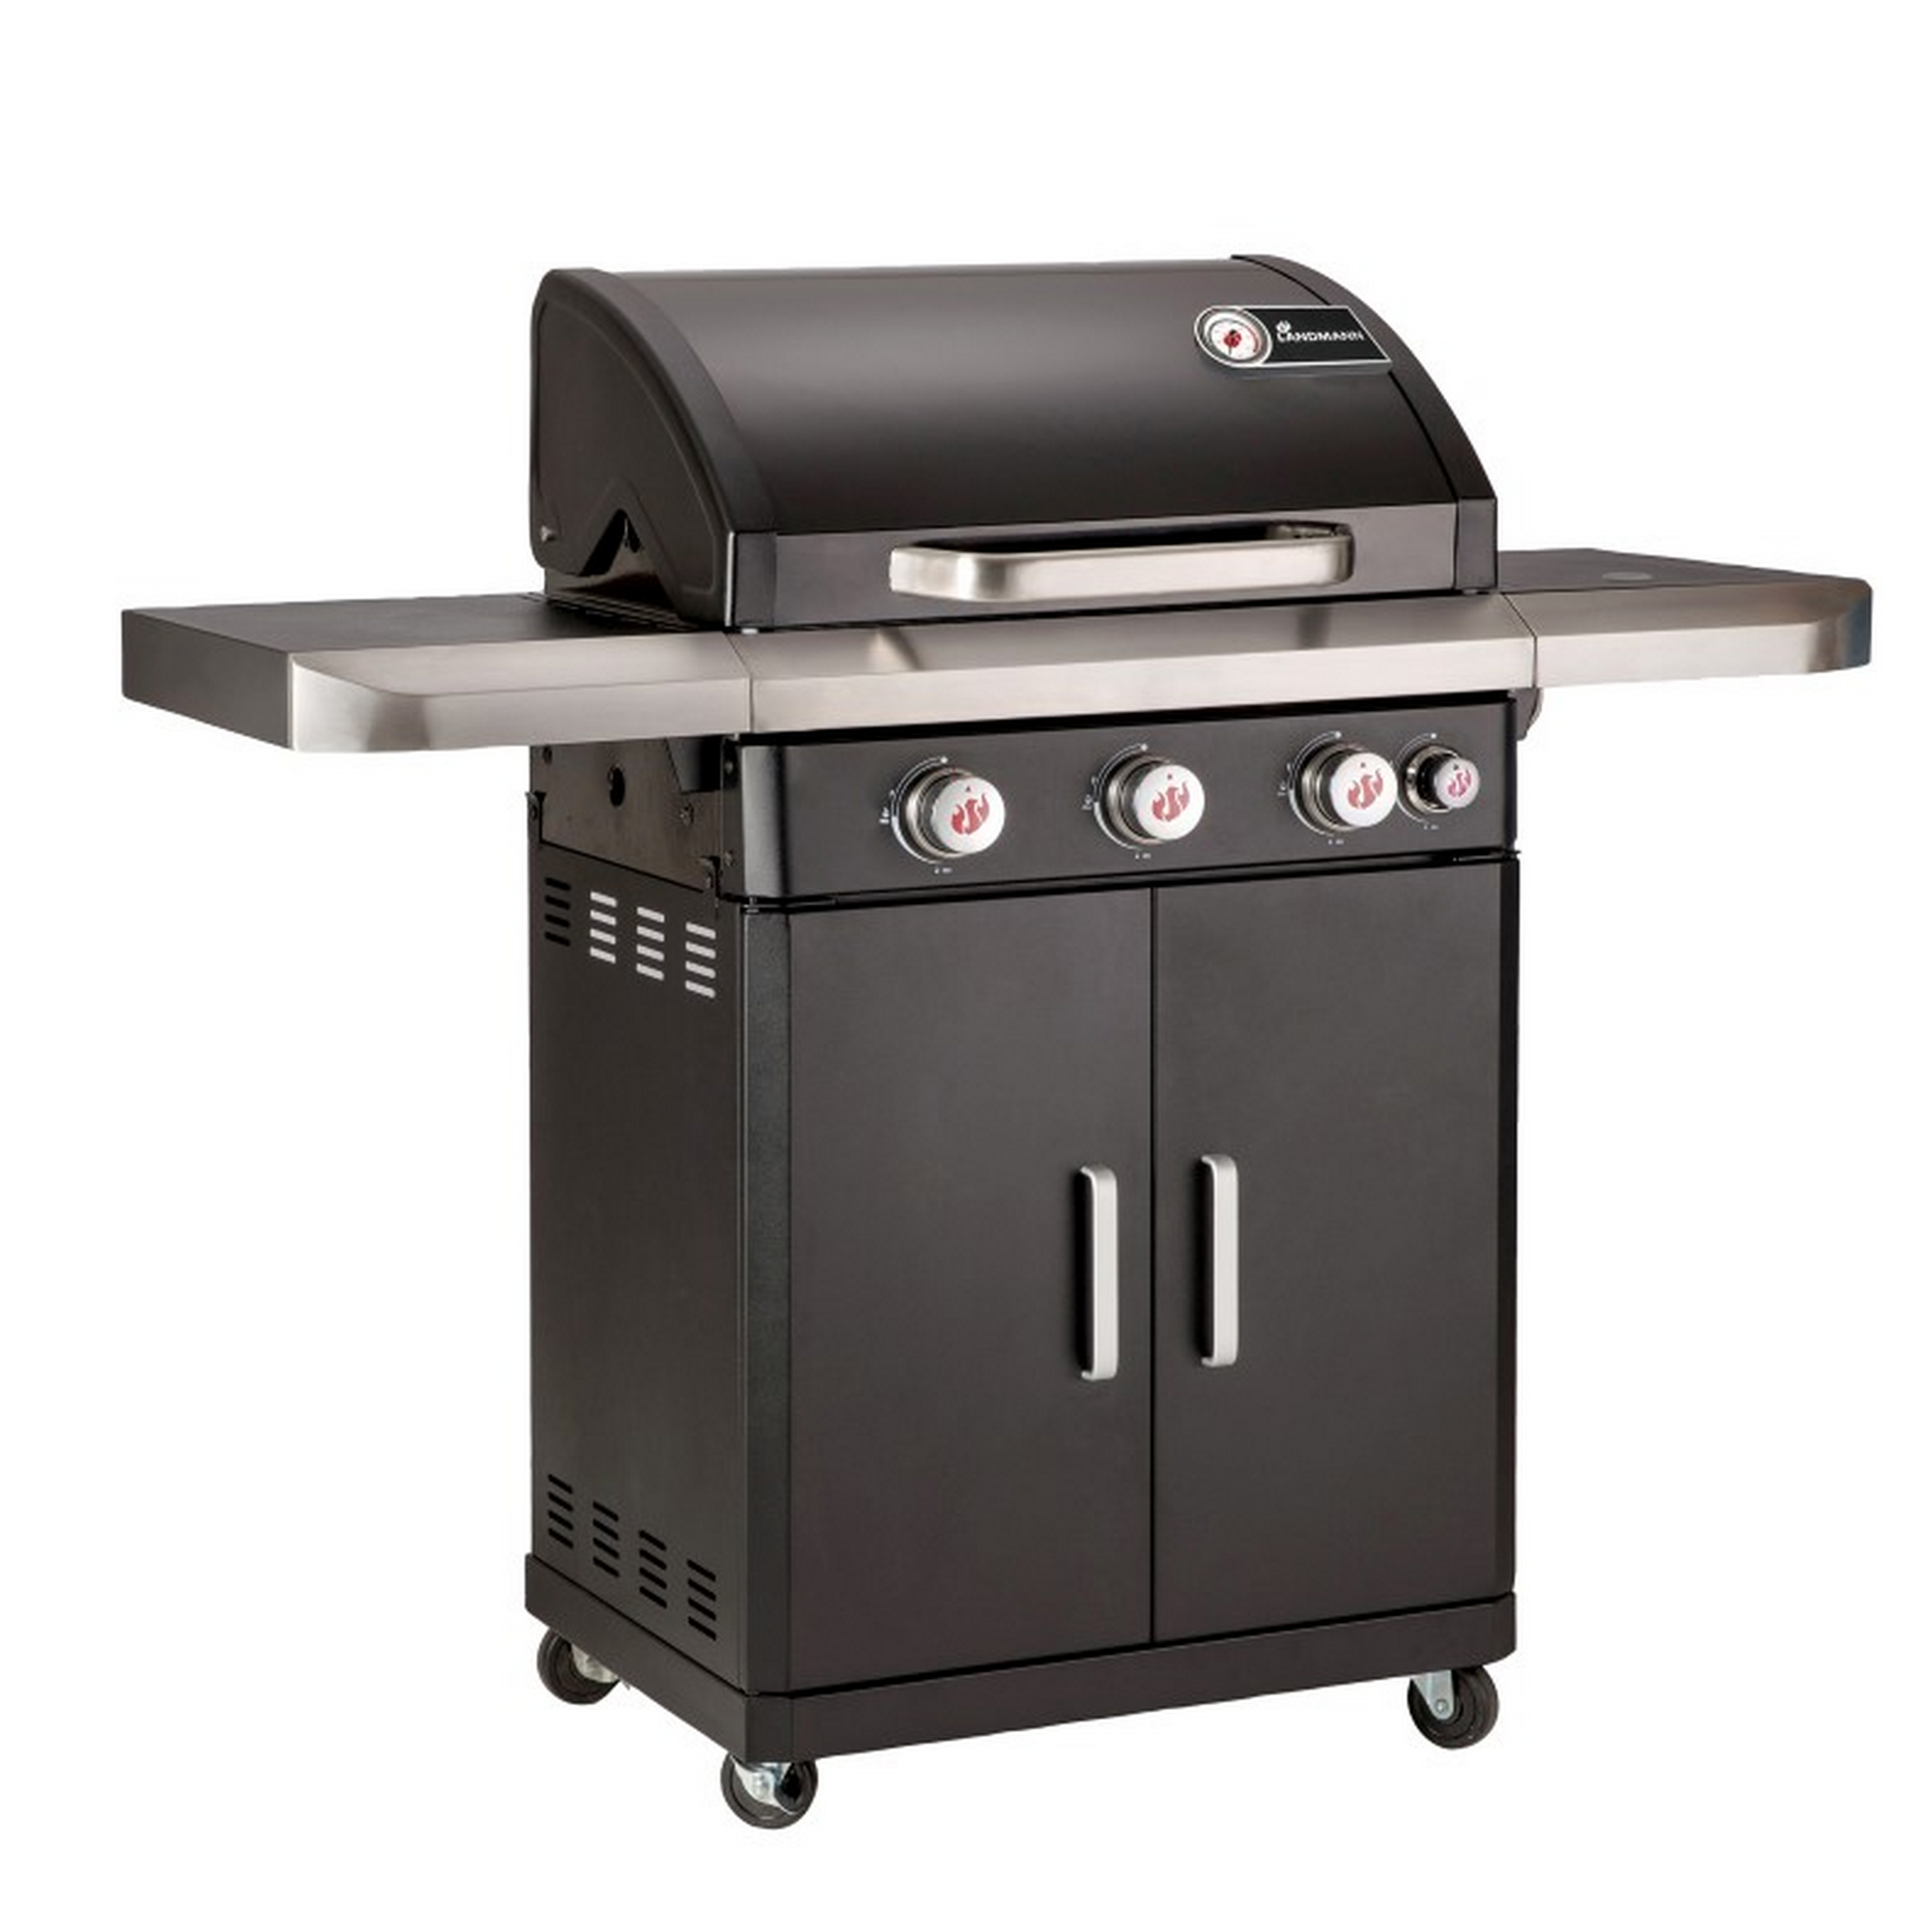 Gasgrill 'Rexon PTS BR 3.1' schwarz/silbern 135 x 120 x 52 cm + product picture